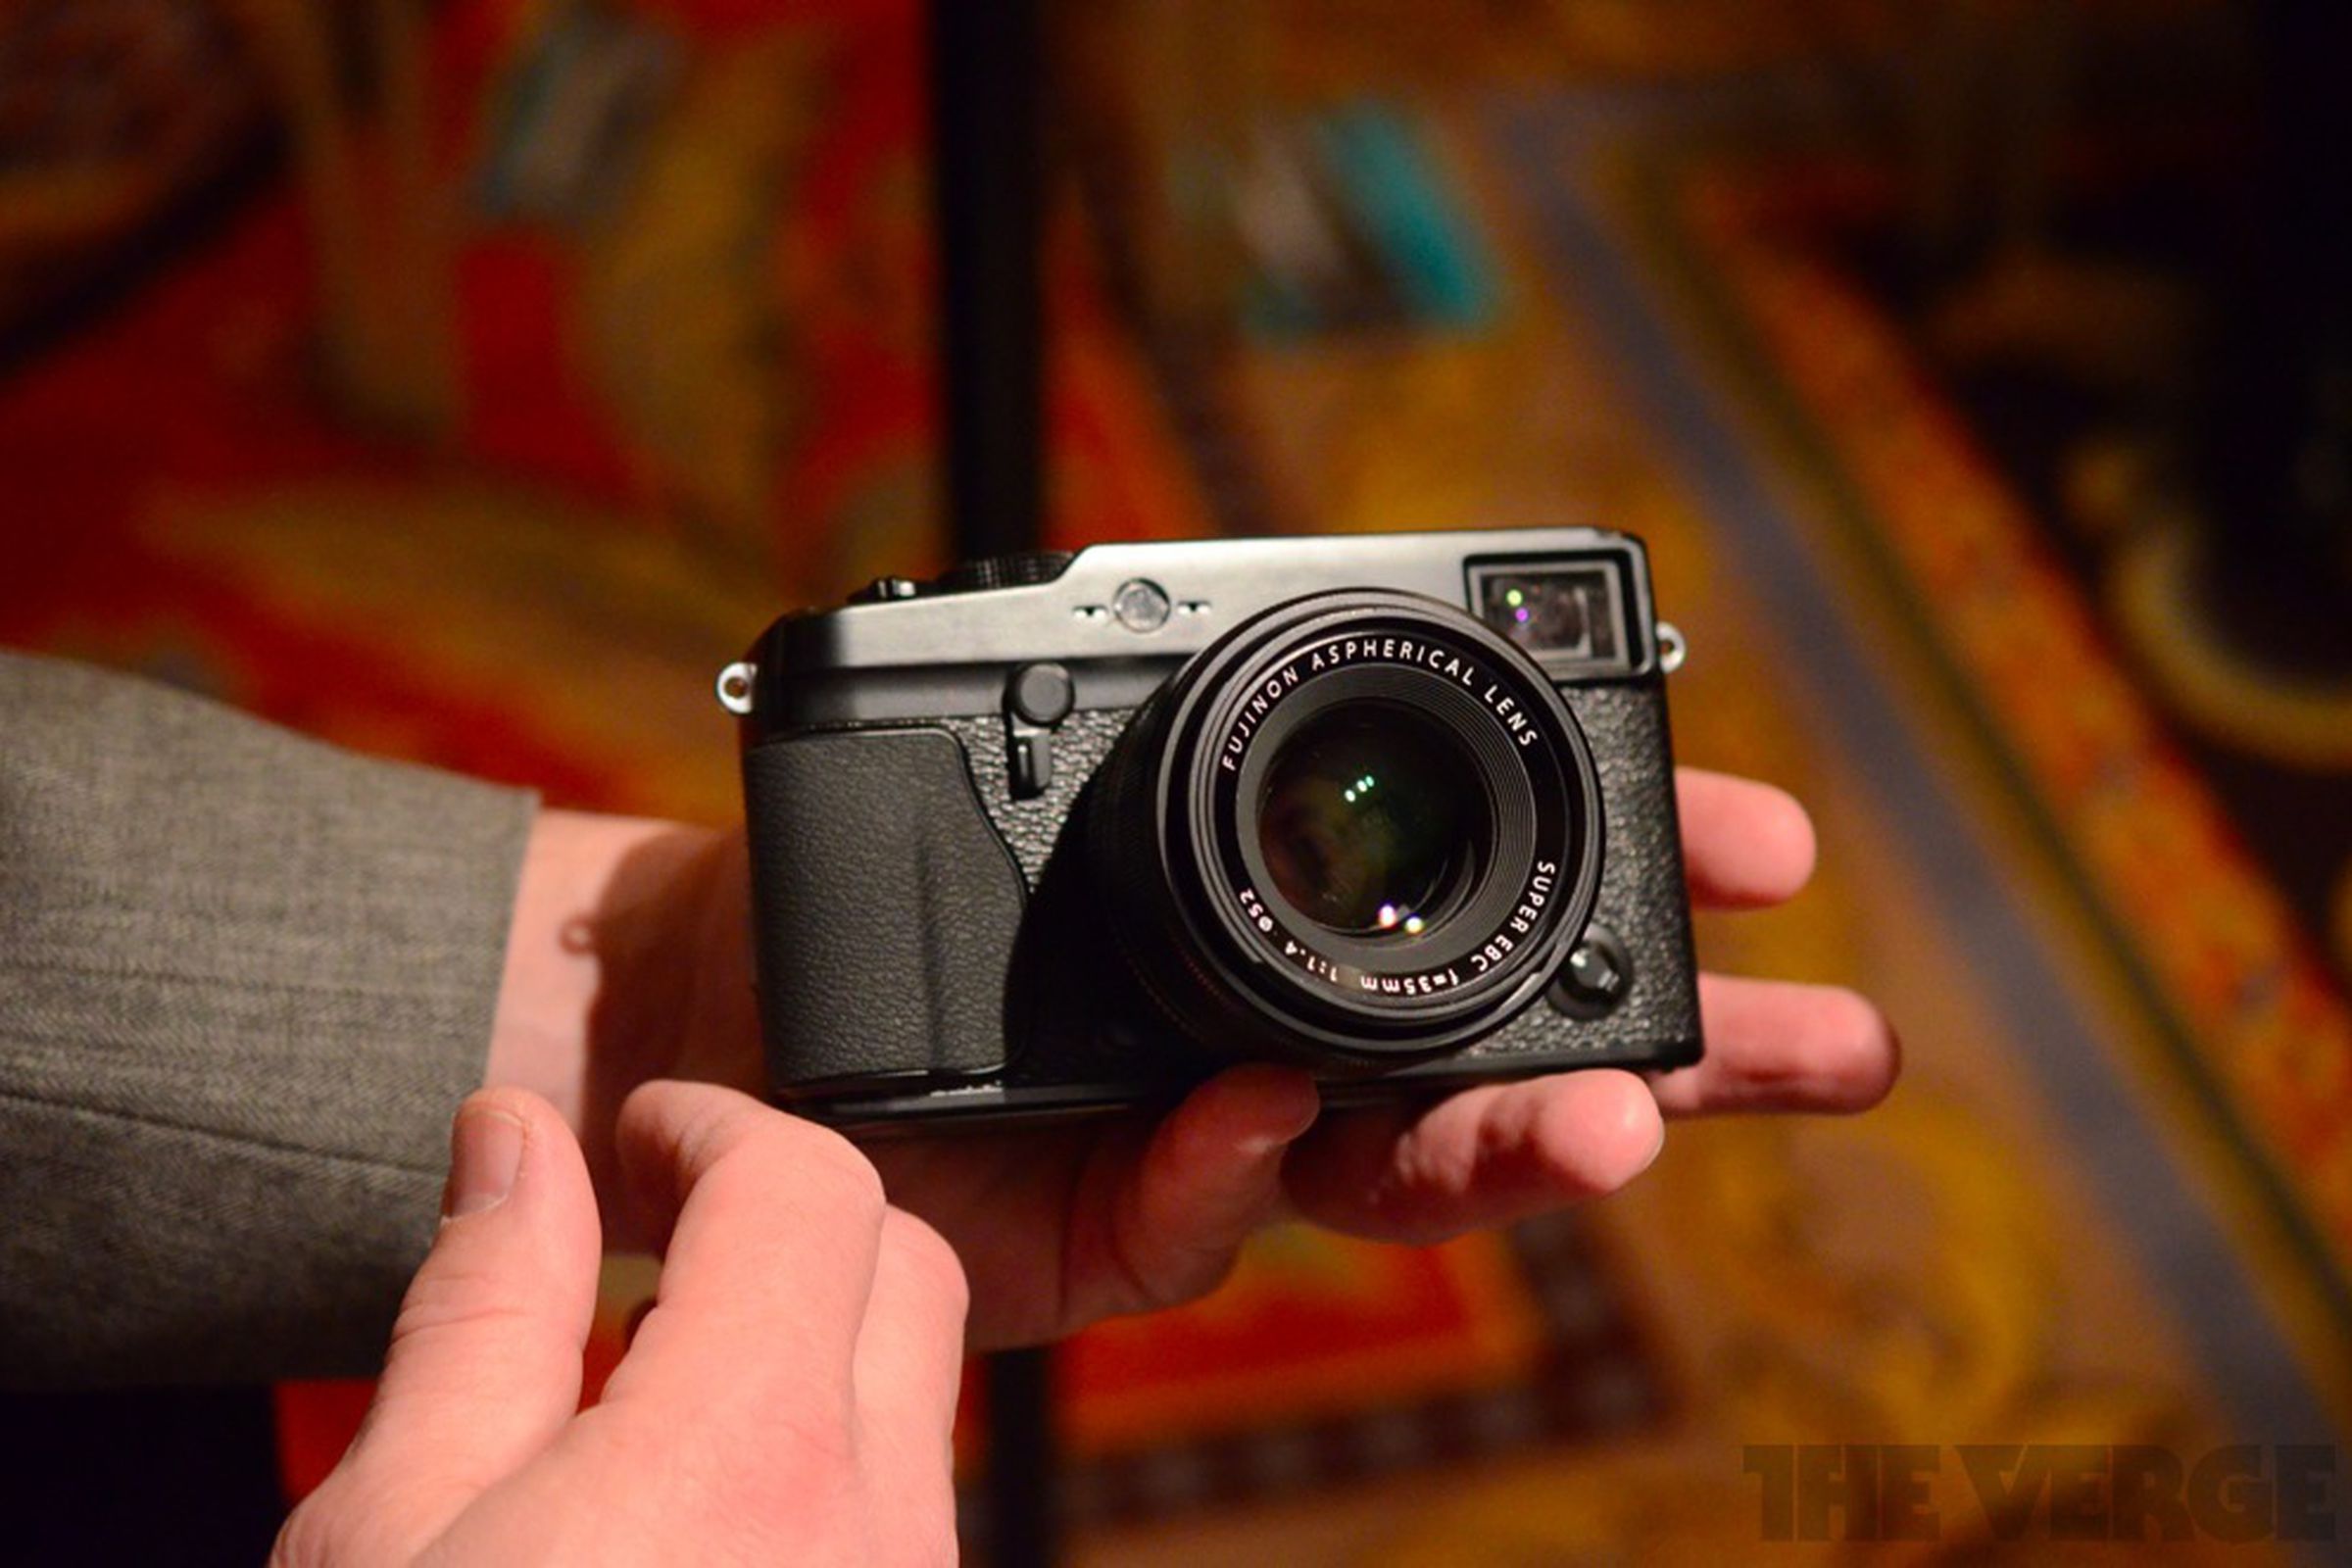 Gallery Photo: Fujifilm X-Pro1 hands-on pictures